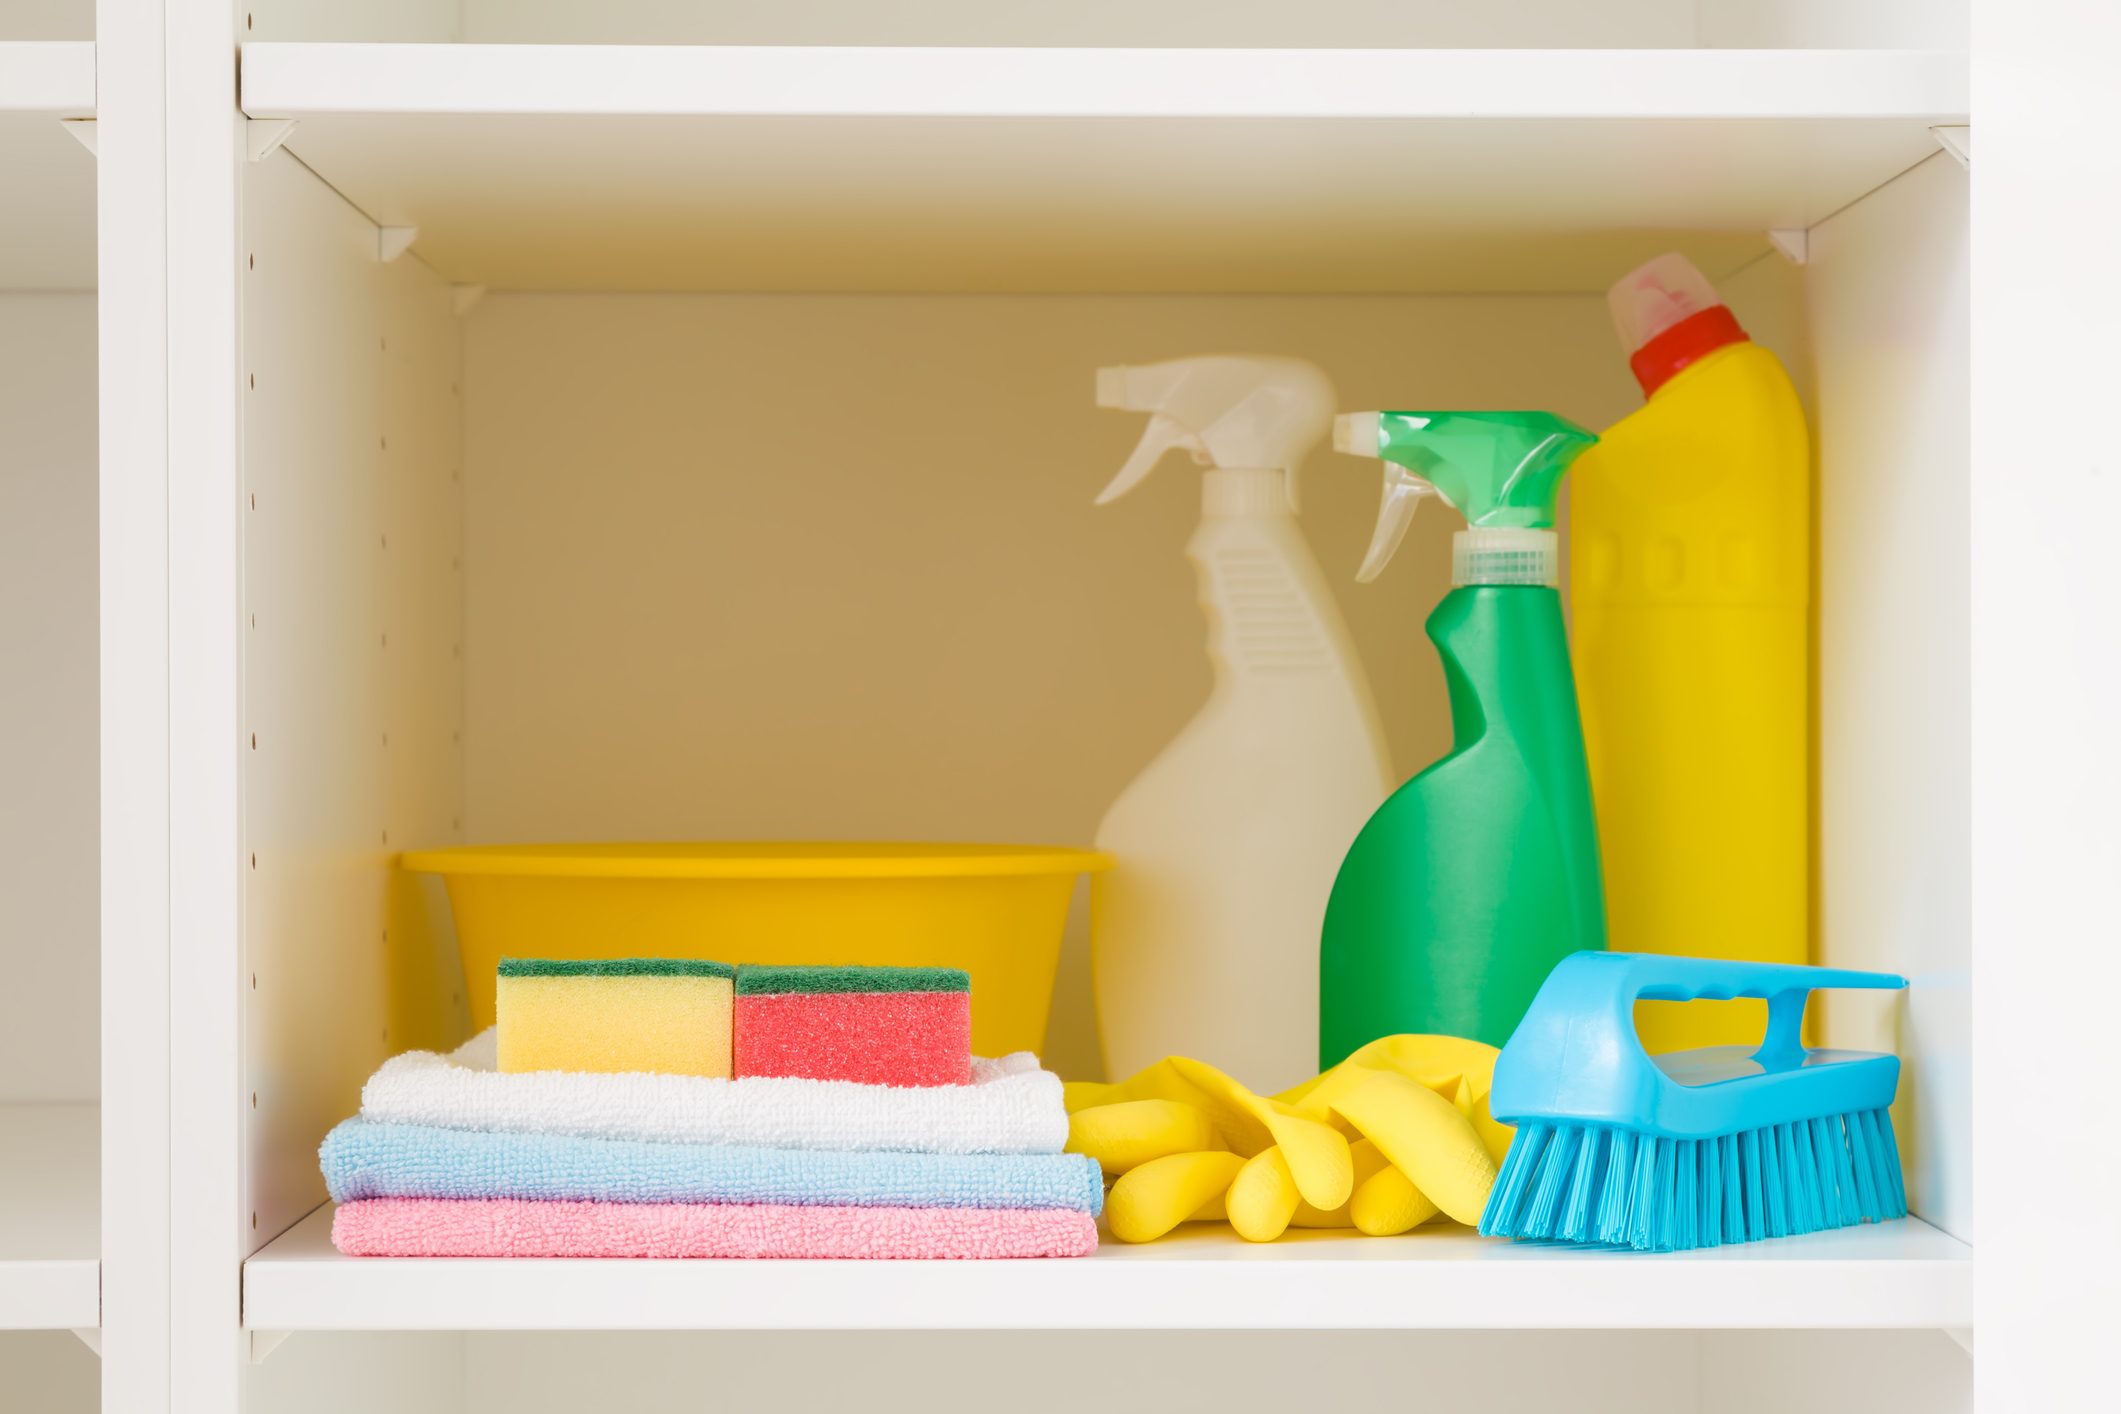 Hacks for organizing your cleaning products